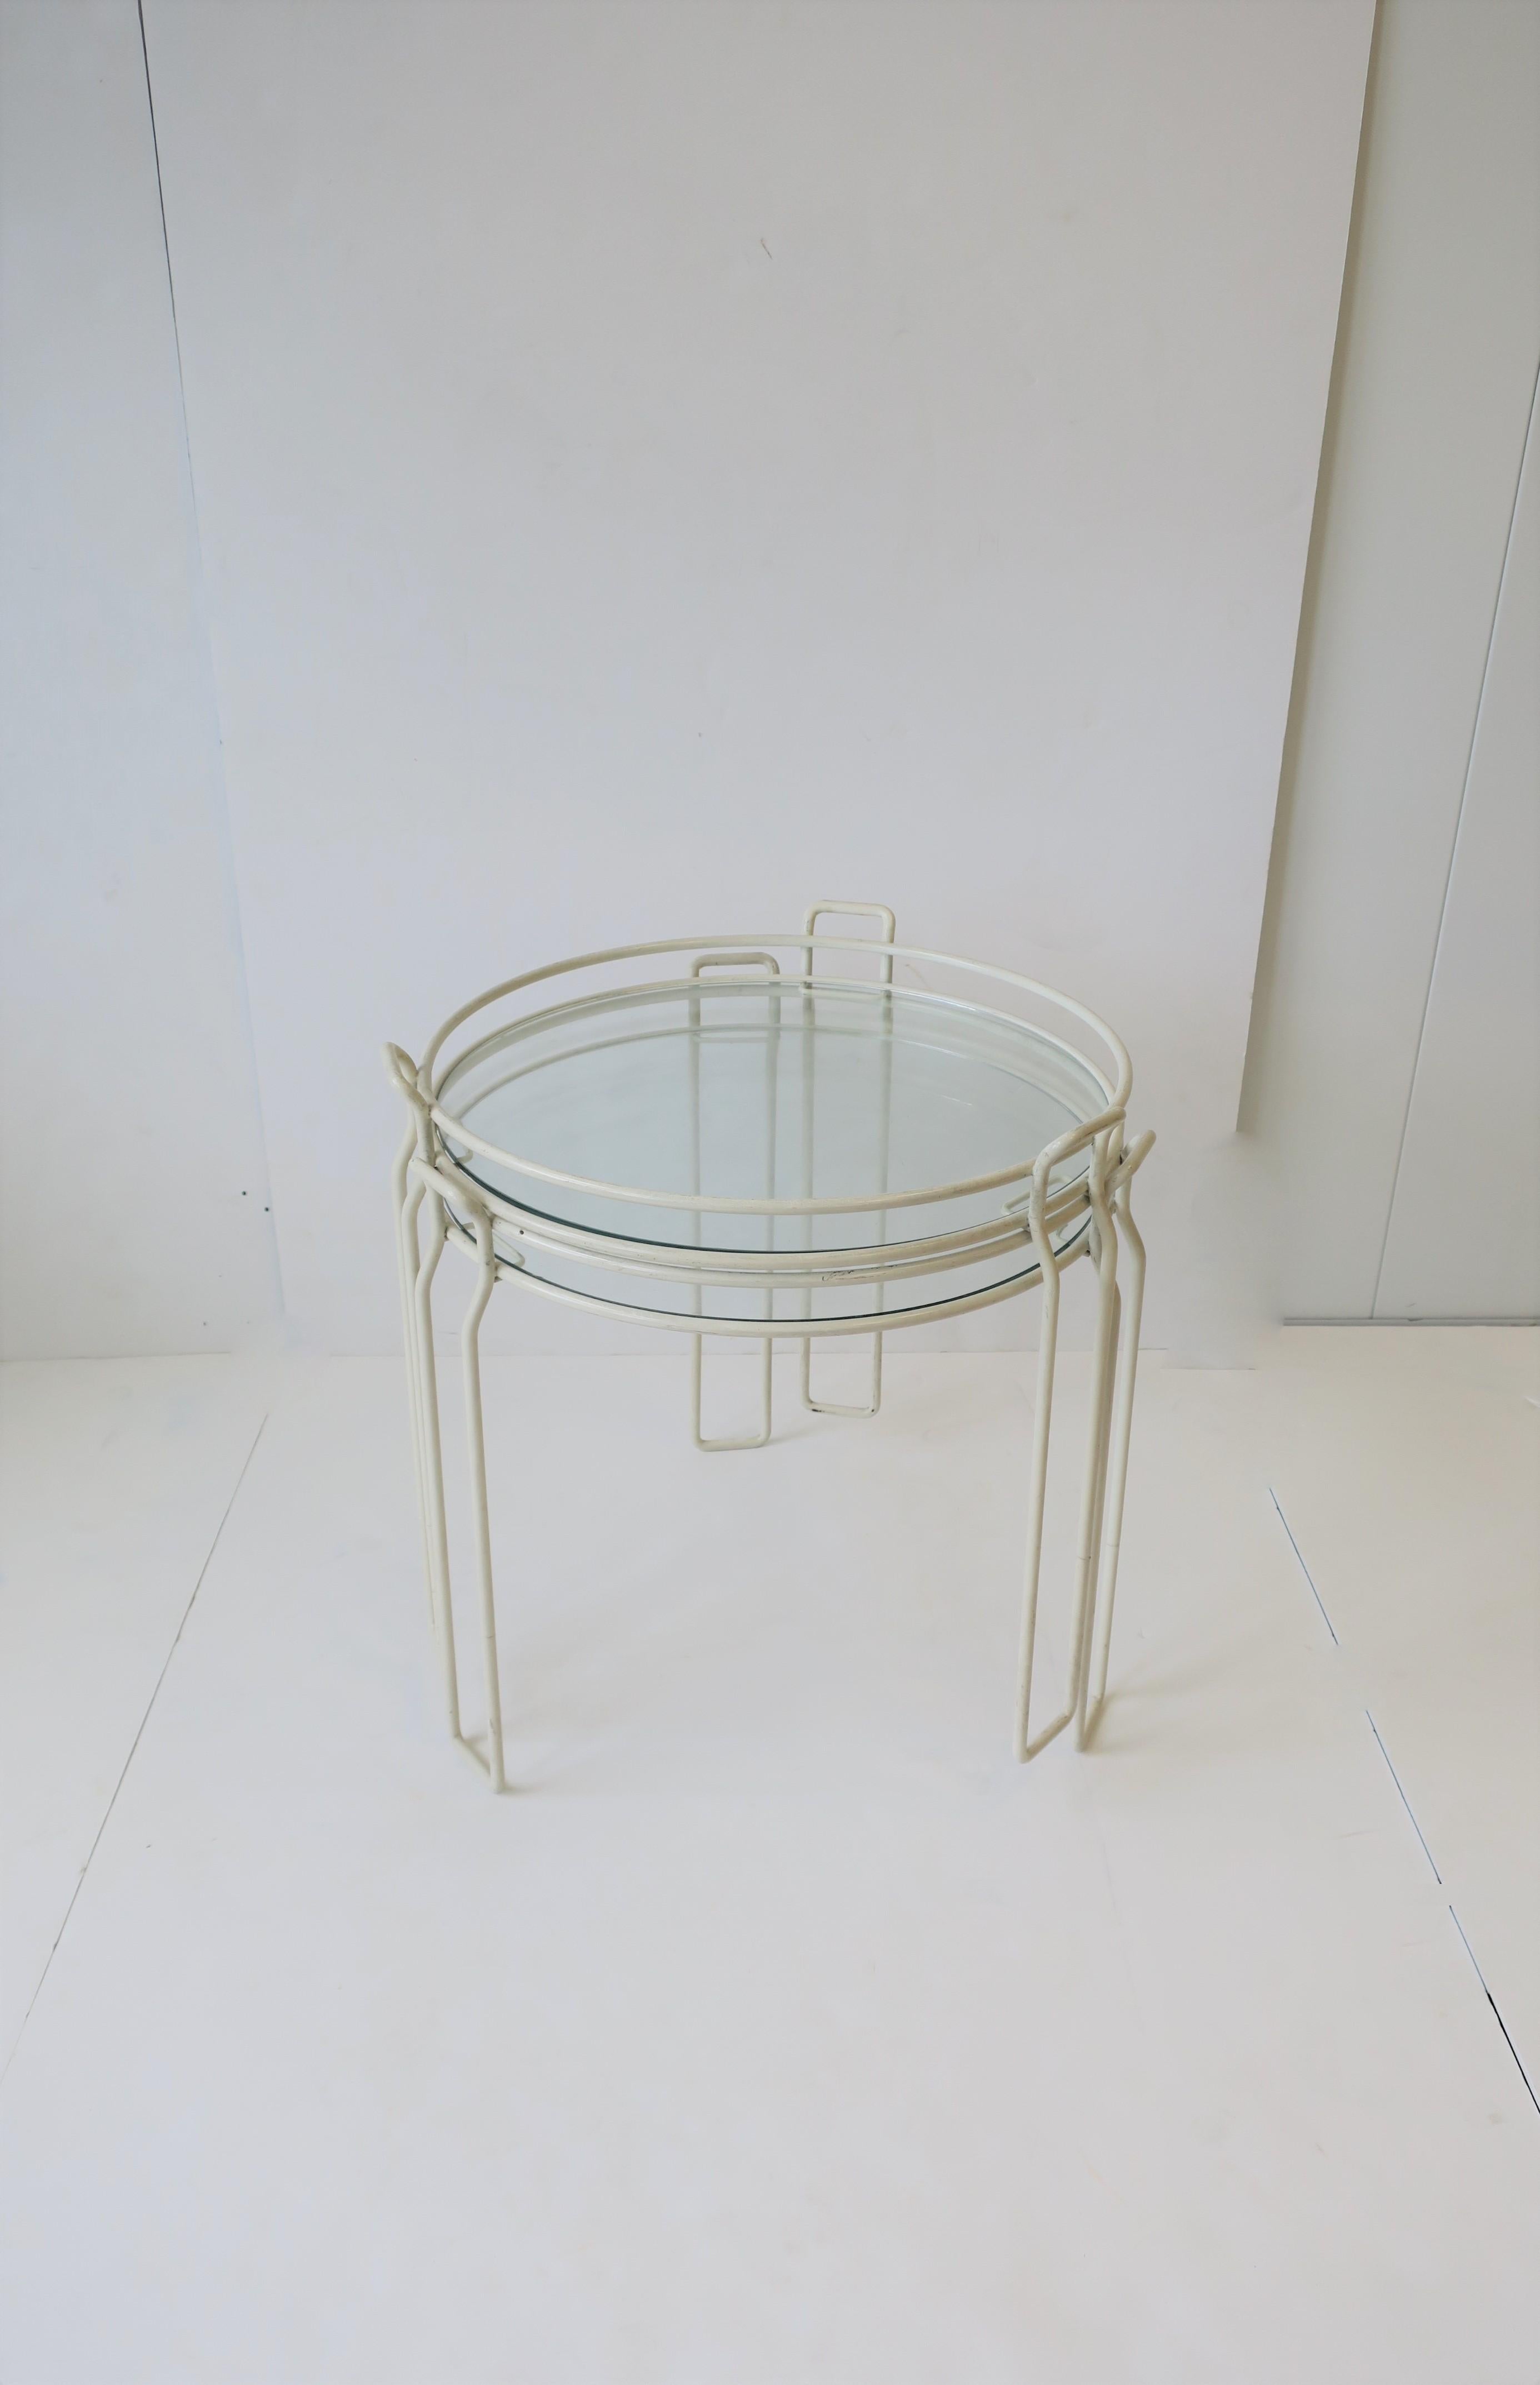 A chic set of two (2) Modern style or Mid-Century Modern period nesting/stacking or side drinks small tubular white tables, circa 1960s. Tables are white enamel metal frames with circular glass tops, and three small handles for easy lifting or